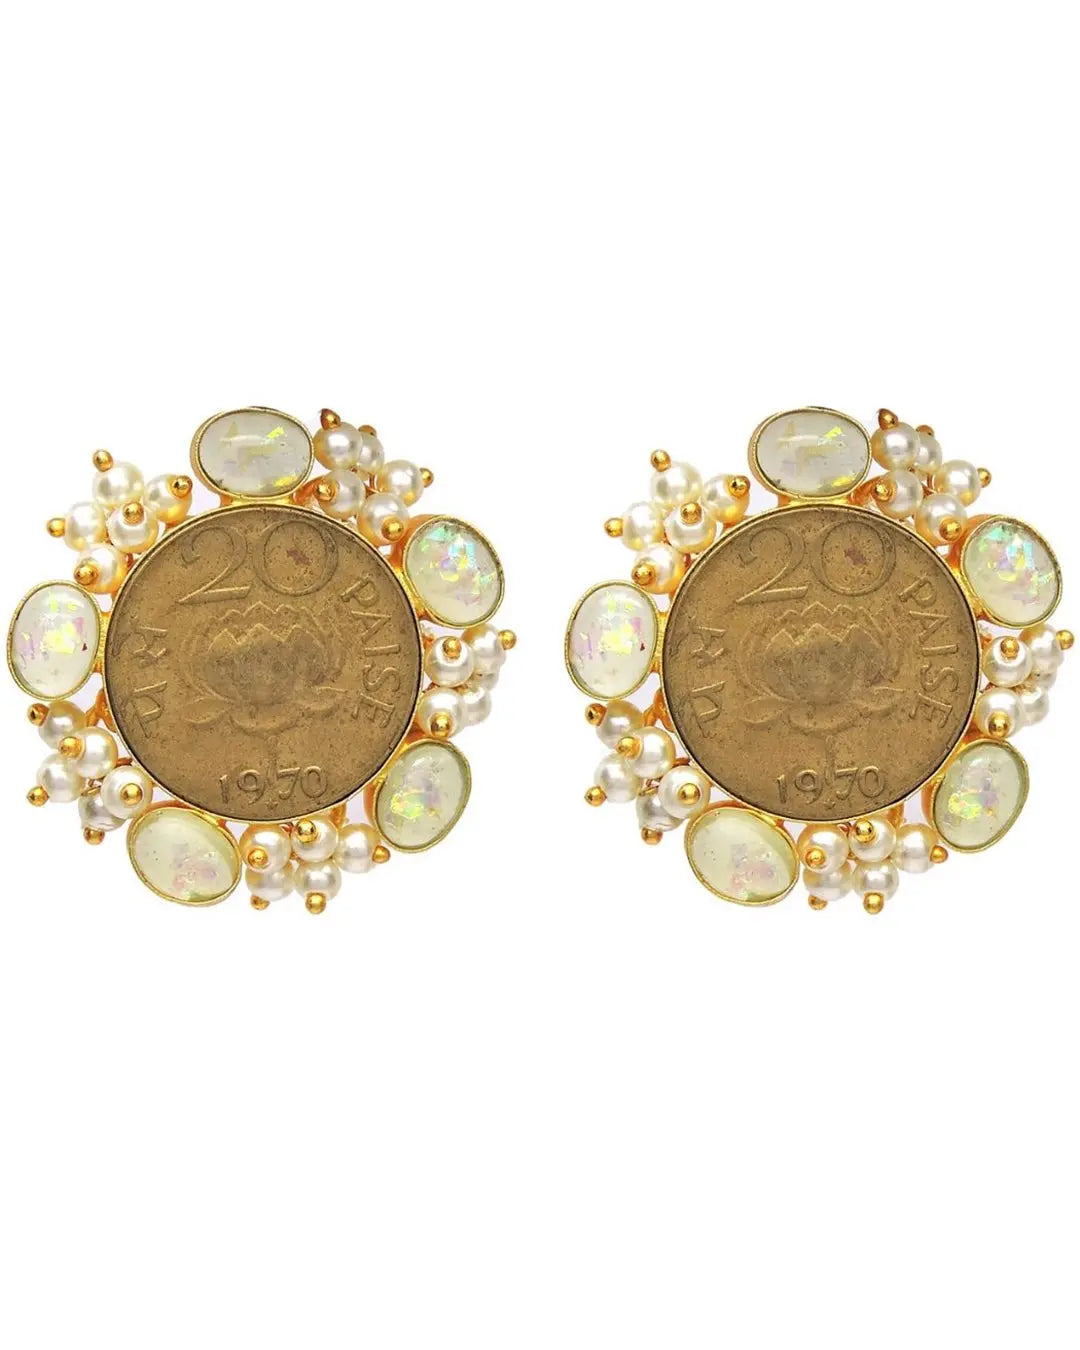 Coin Sphere Earrings- Handcrafted Jewellery from Dori